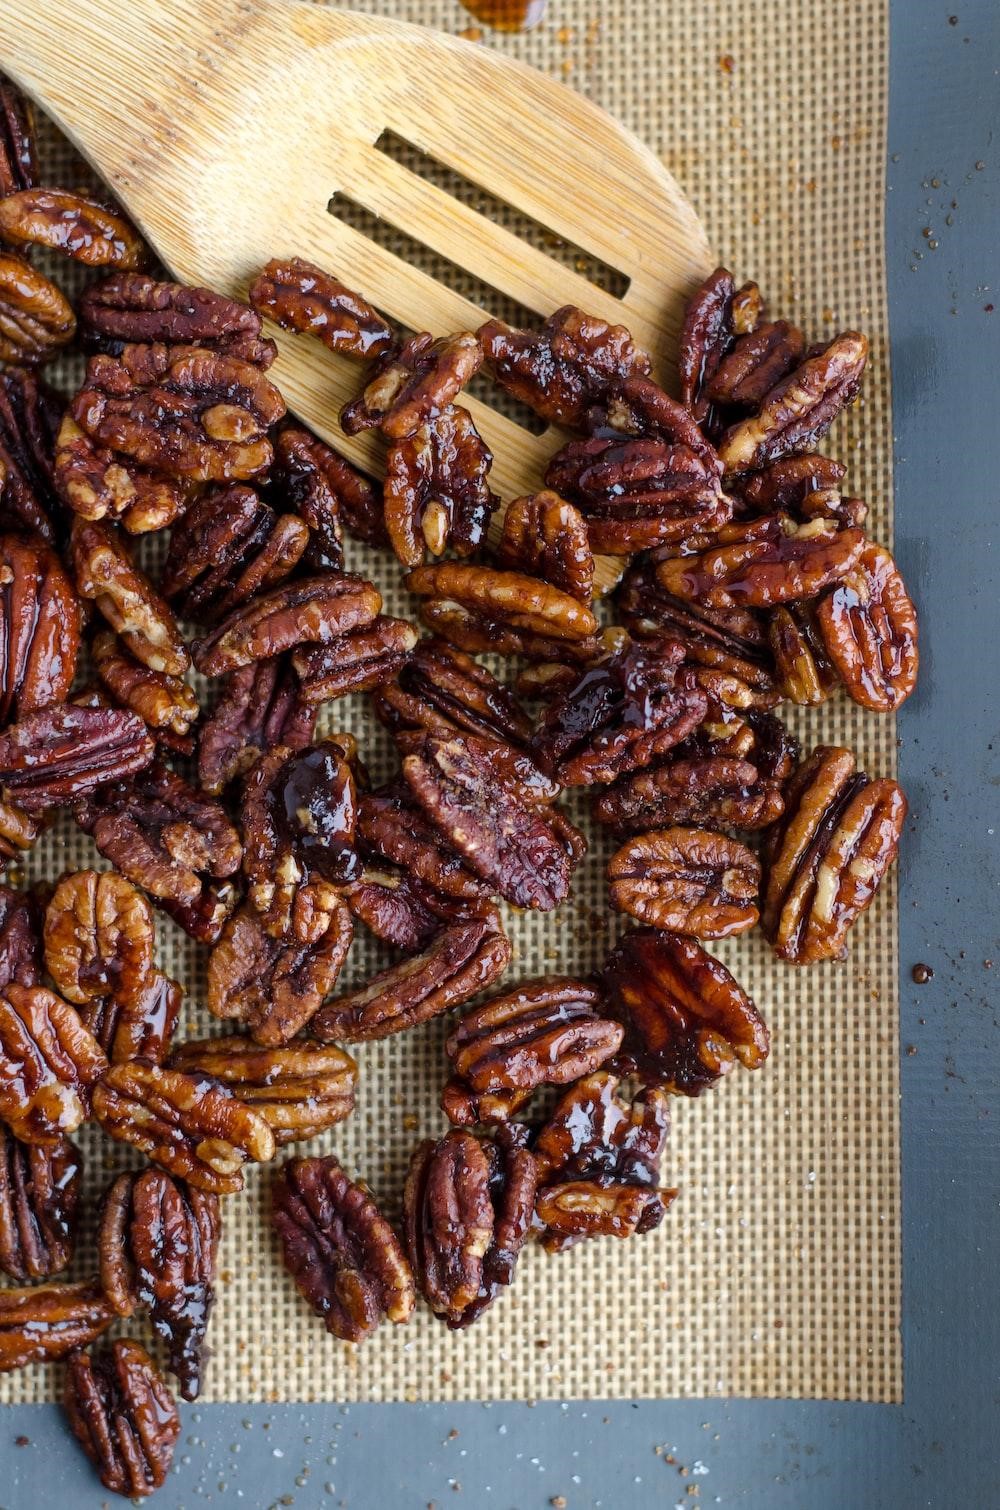 Pecans and their health benefits